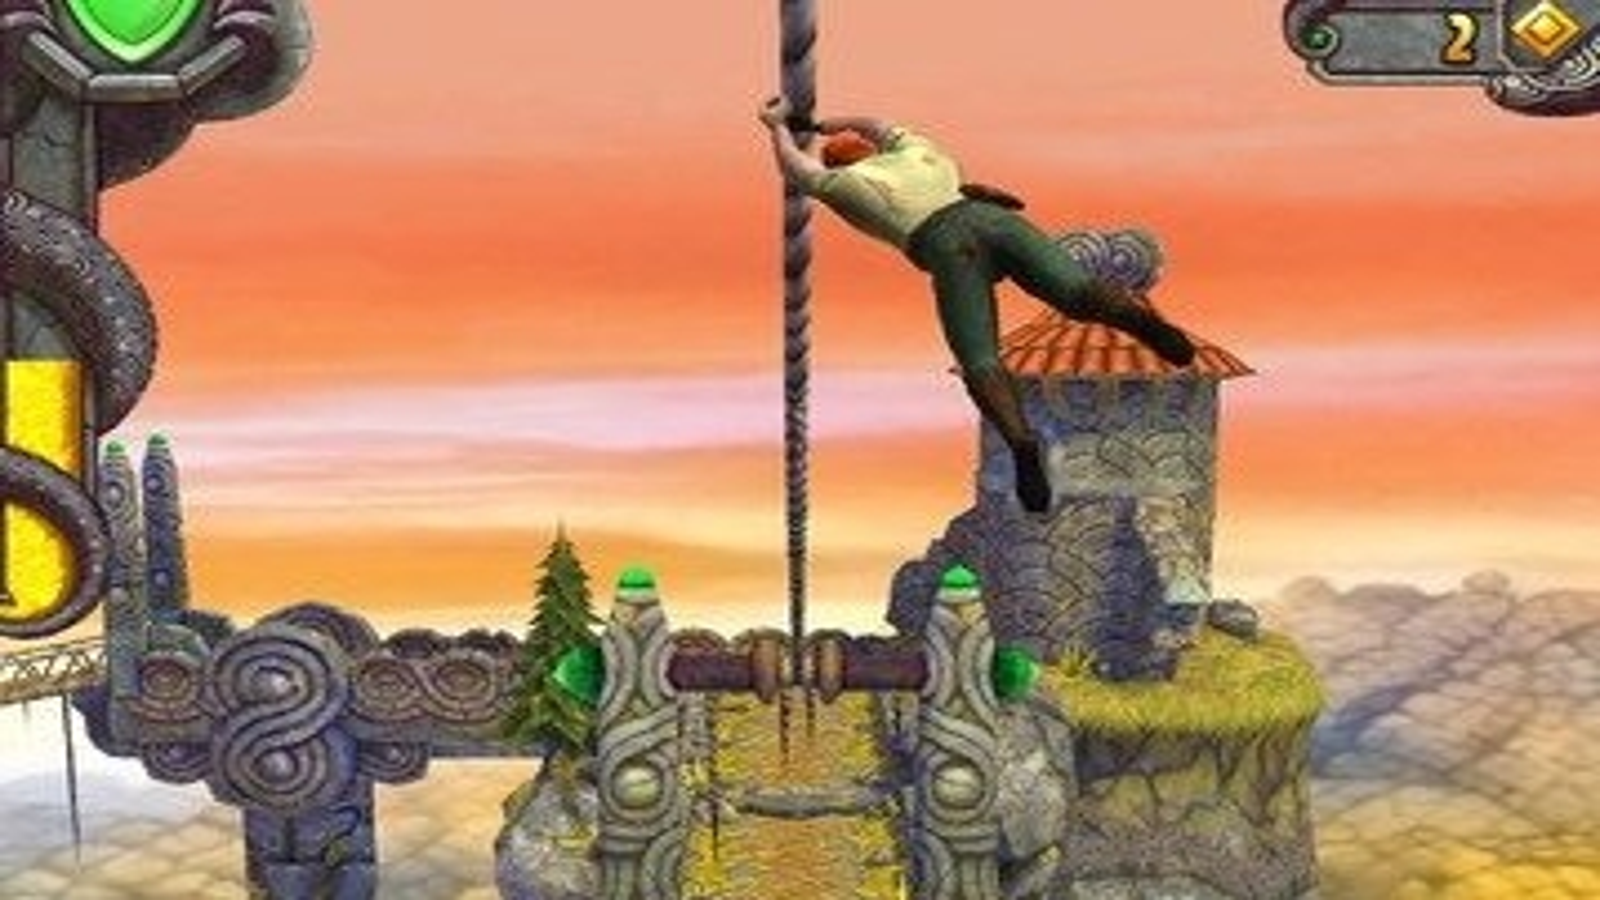 Temple Run crosses a billion downloads. But will it become a